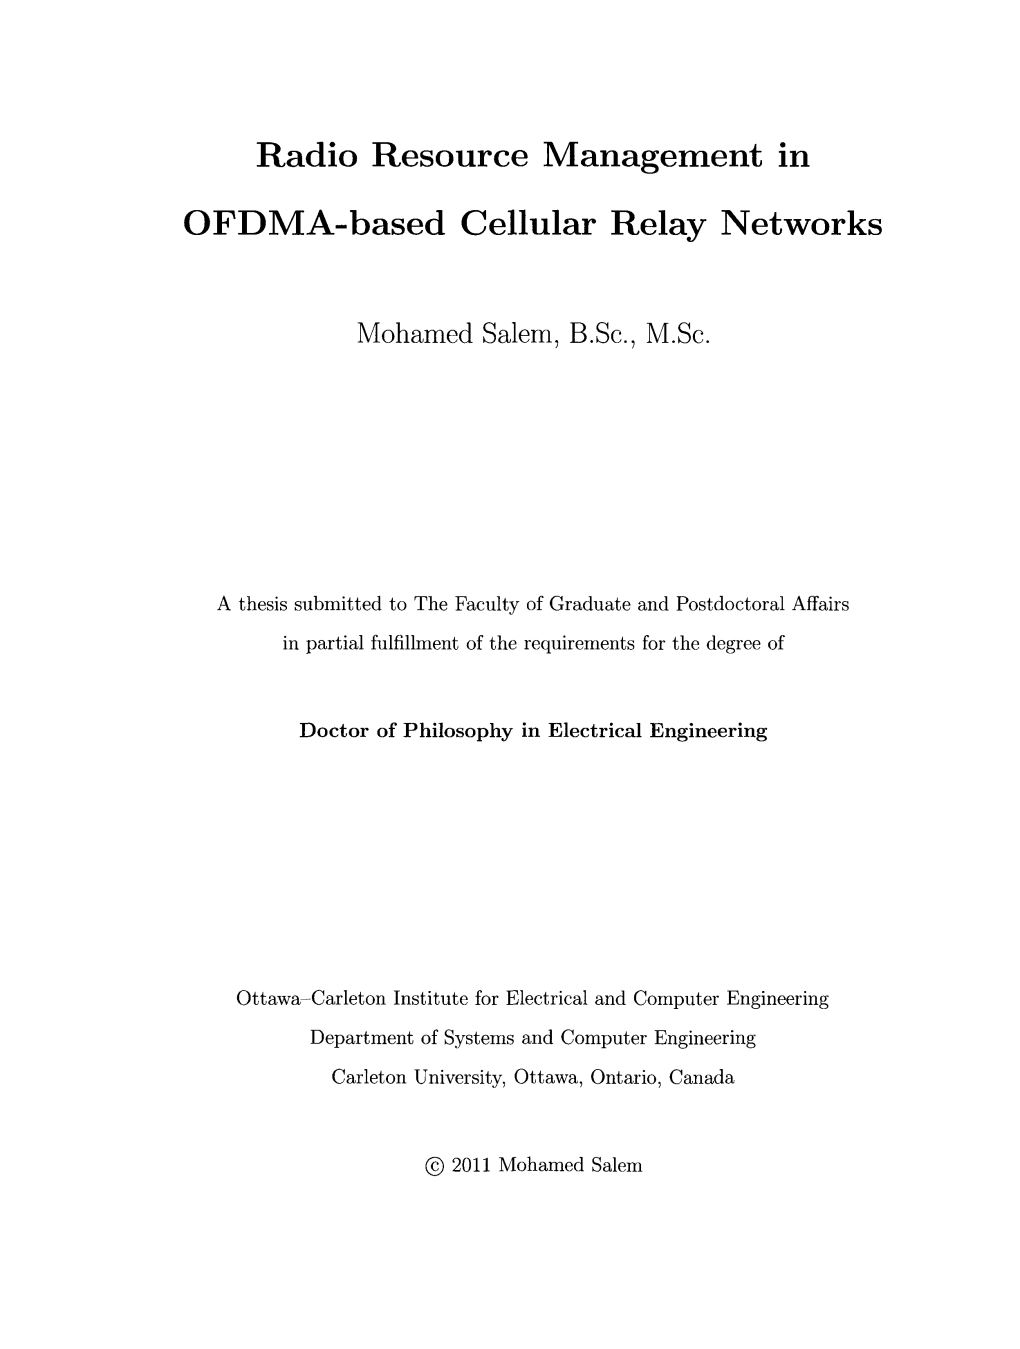 Radio Resource Management in OFDMA-Based Cellular Relay Networks